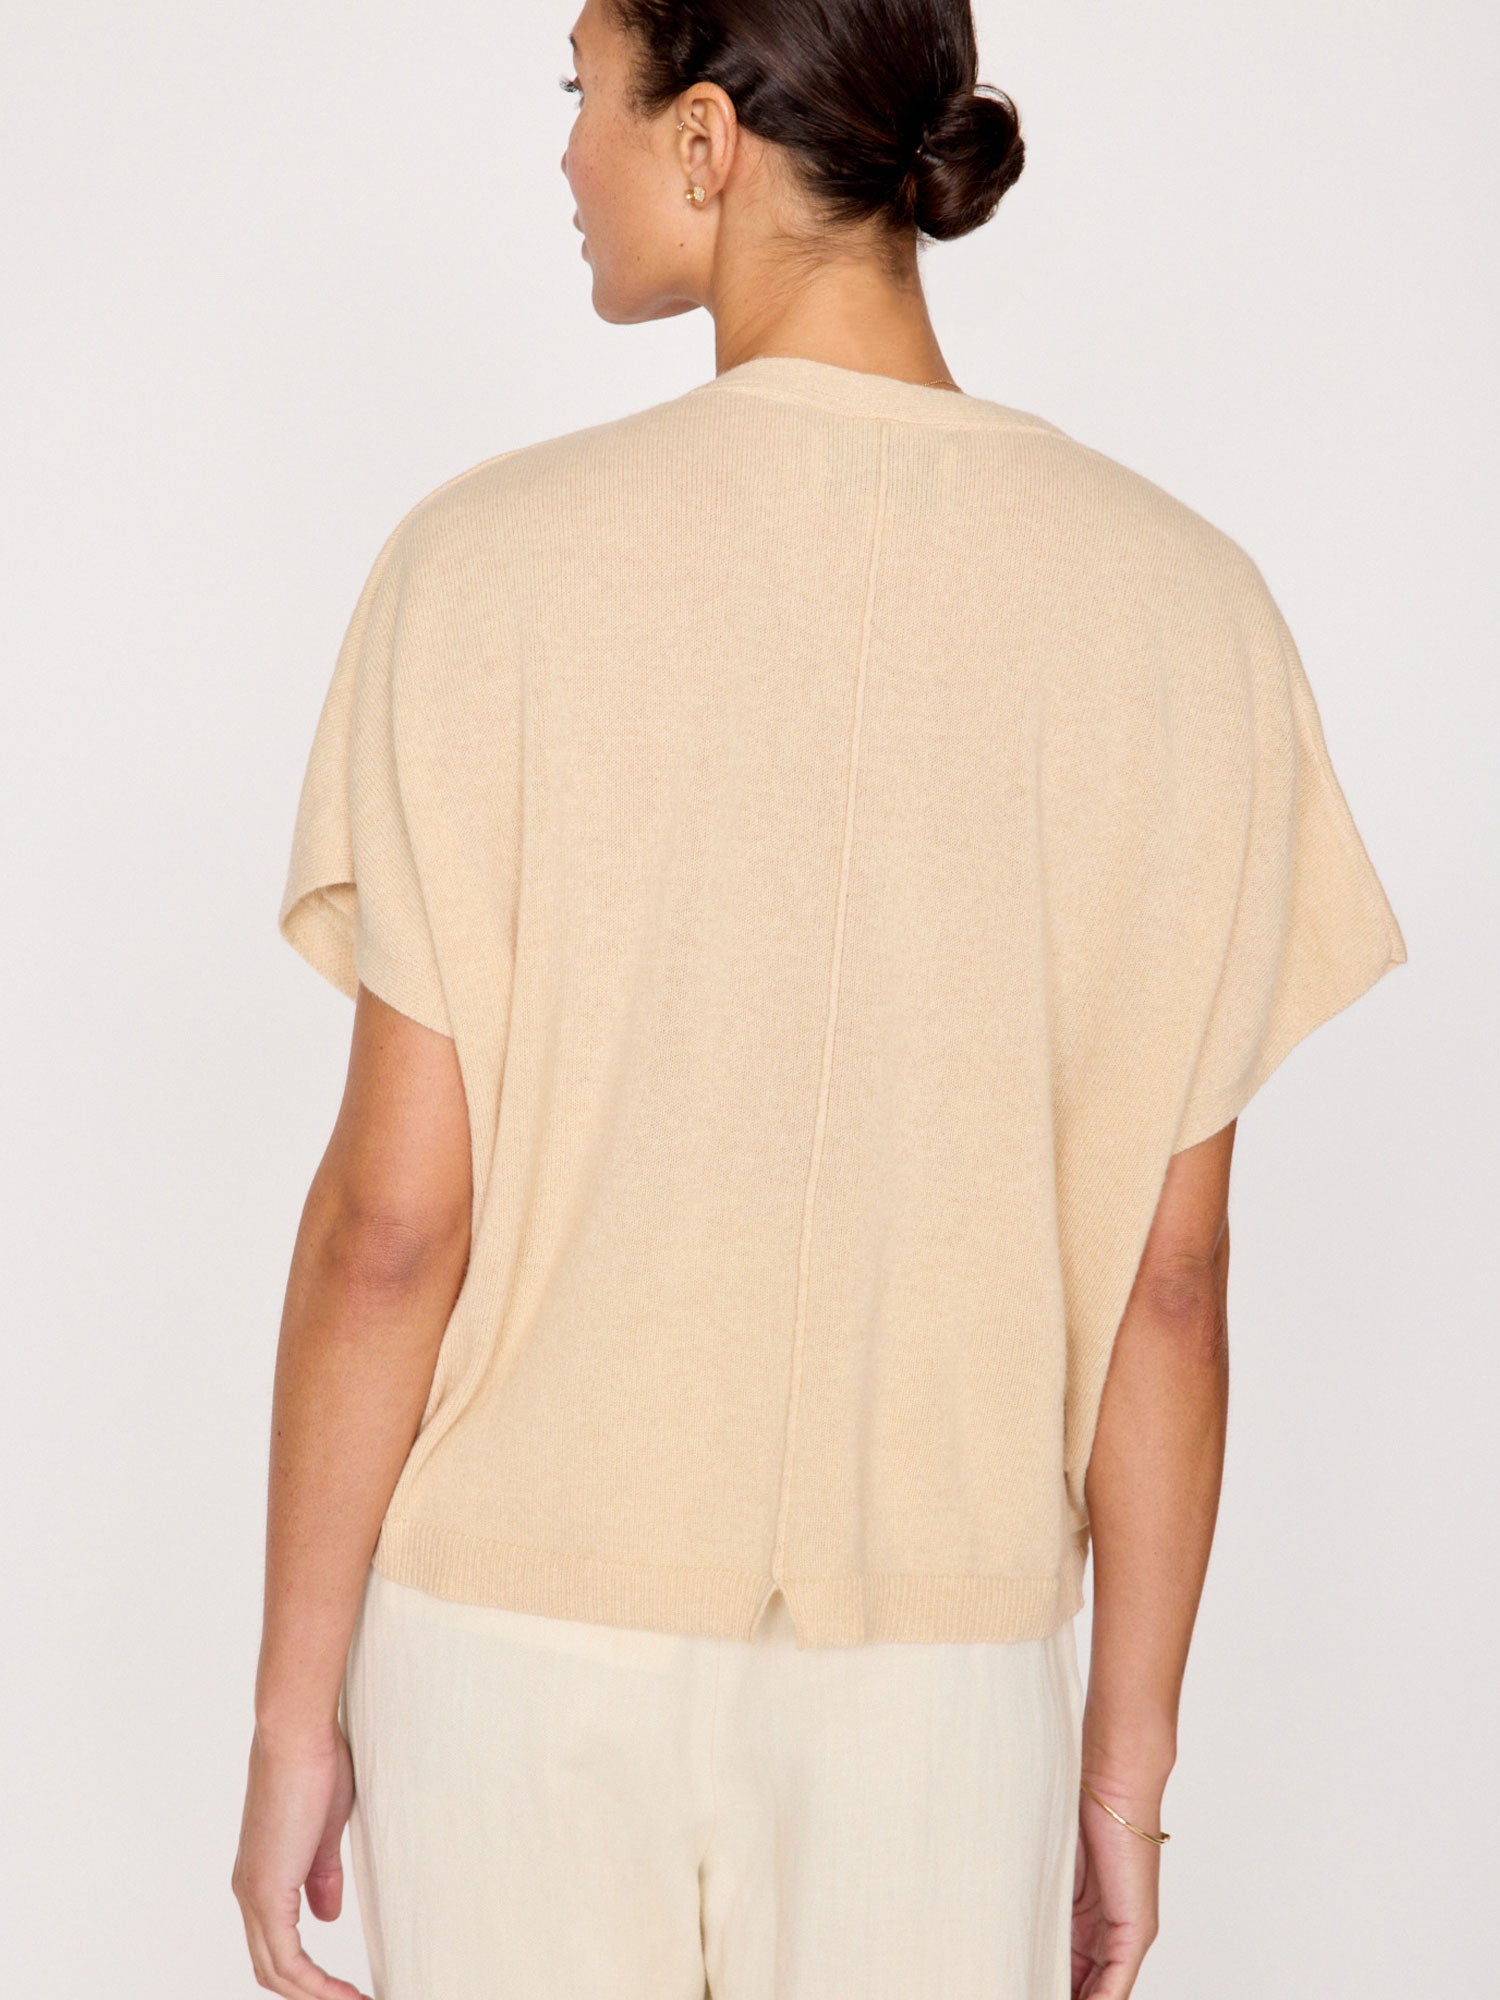 Ophi cashmere tan V-neck t-shirt top back view